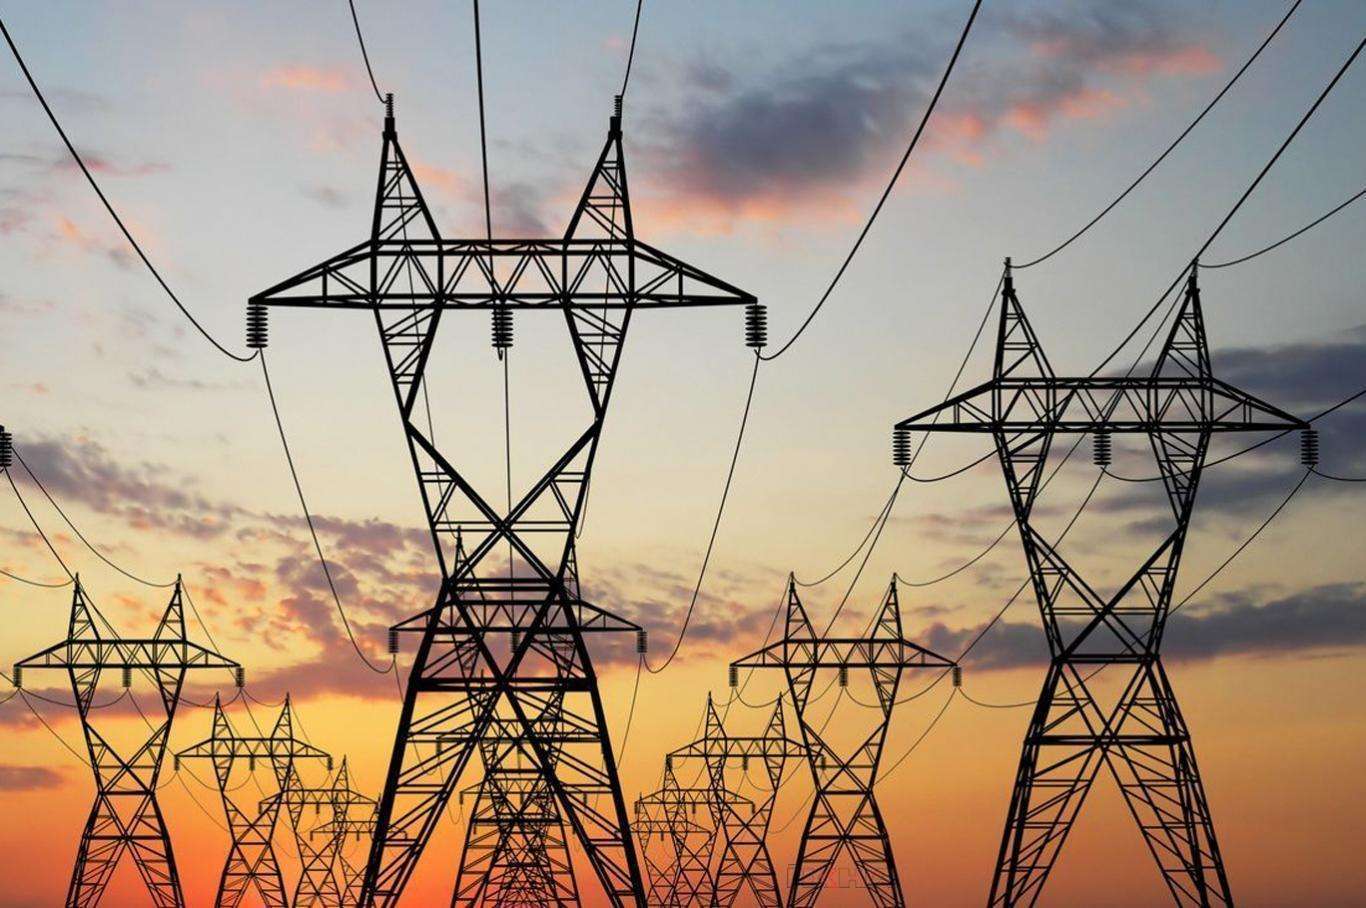 Turkey: Electricity price to increase by 15% starting on June 1